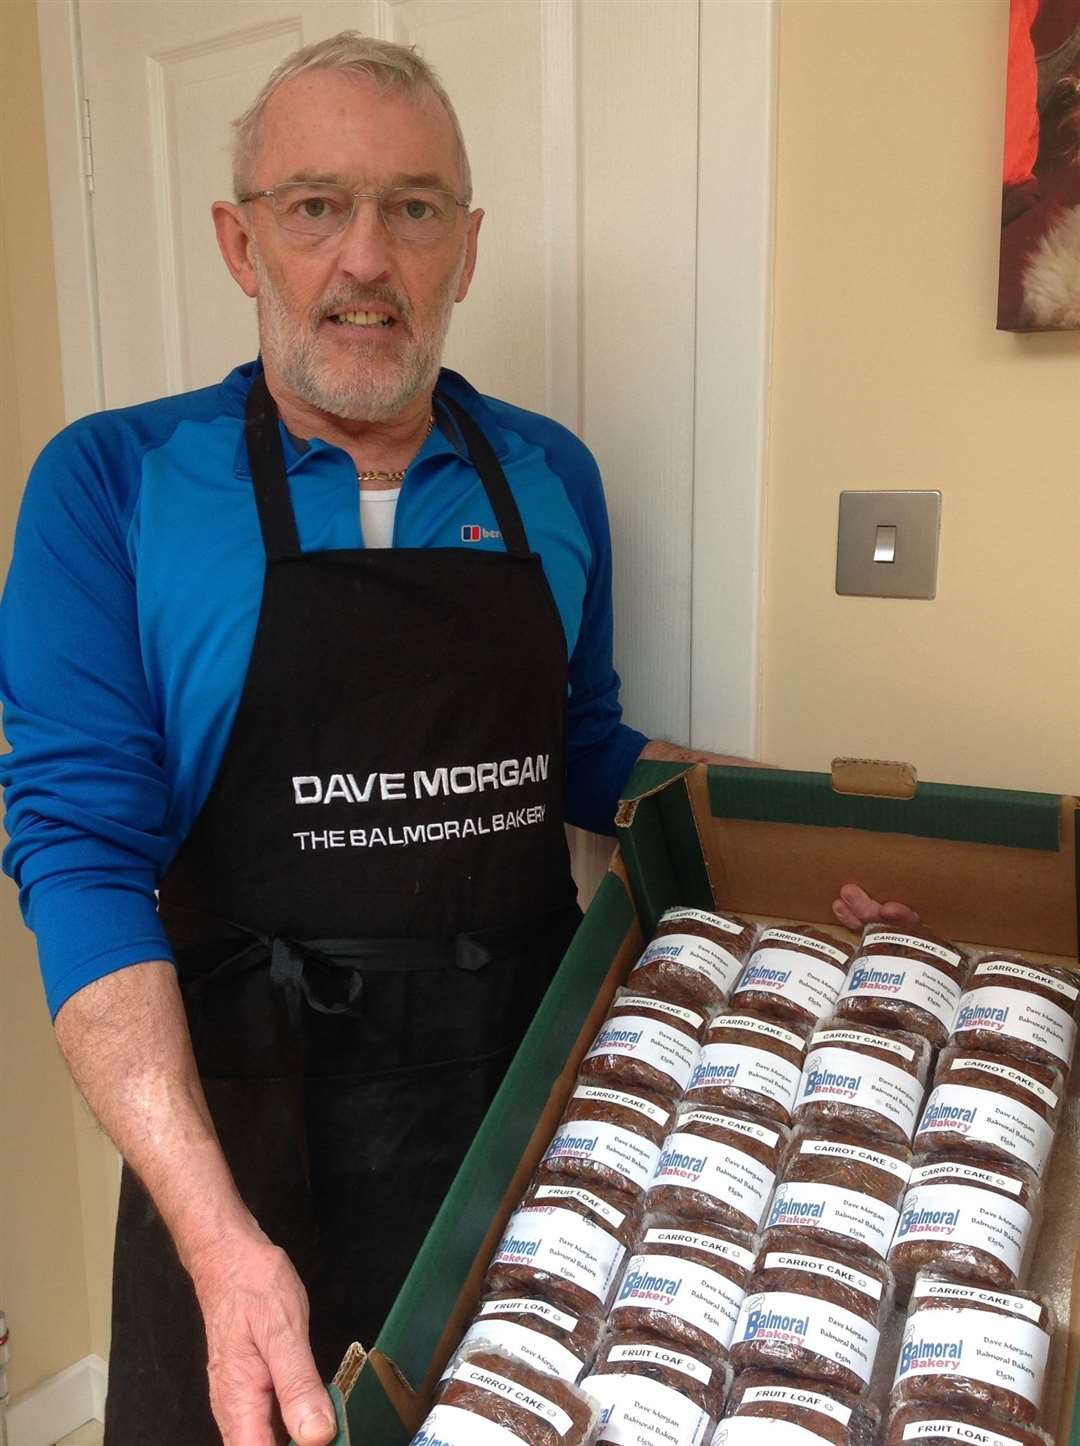 David Morgan has been baking cakes to be distributed to people in the community.